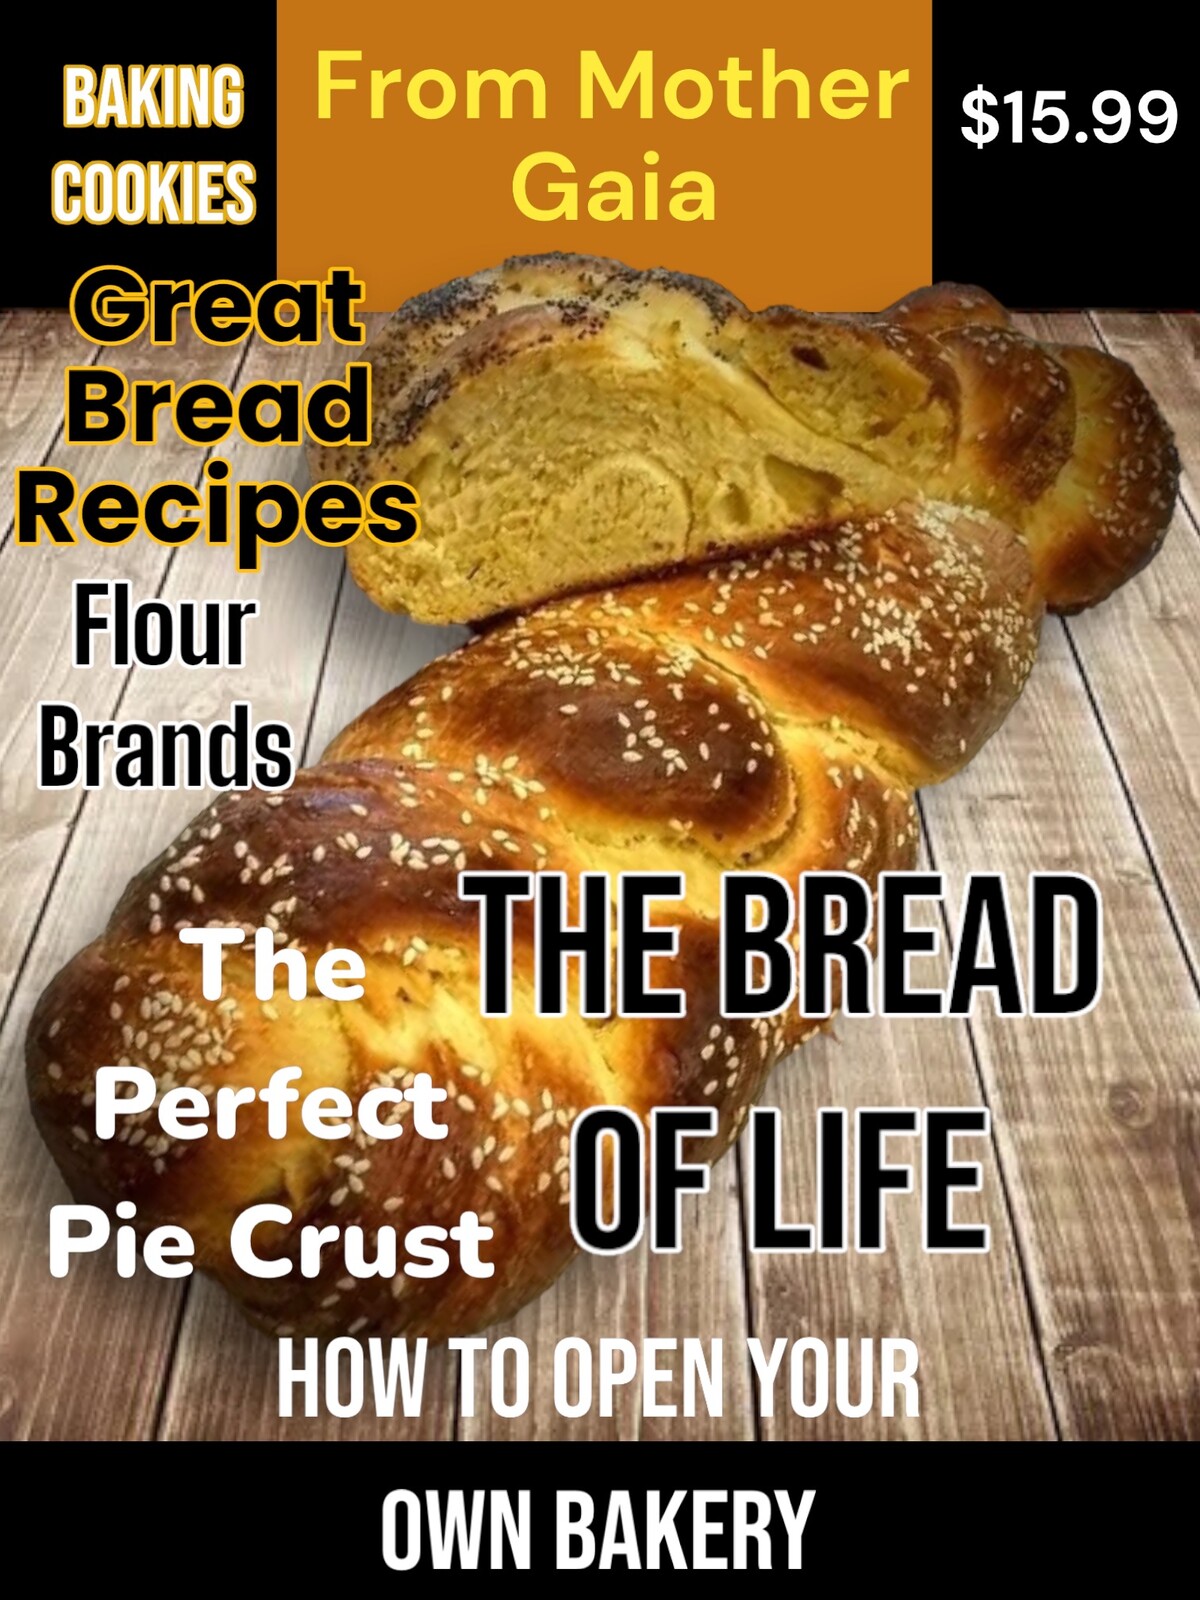 The Bread of Life Magazine cover